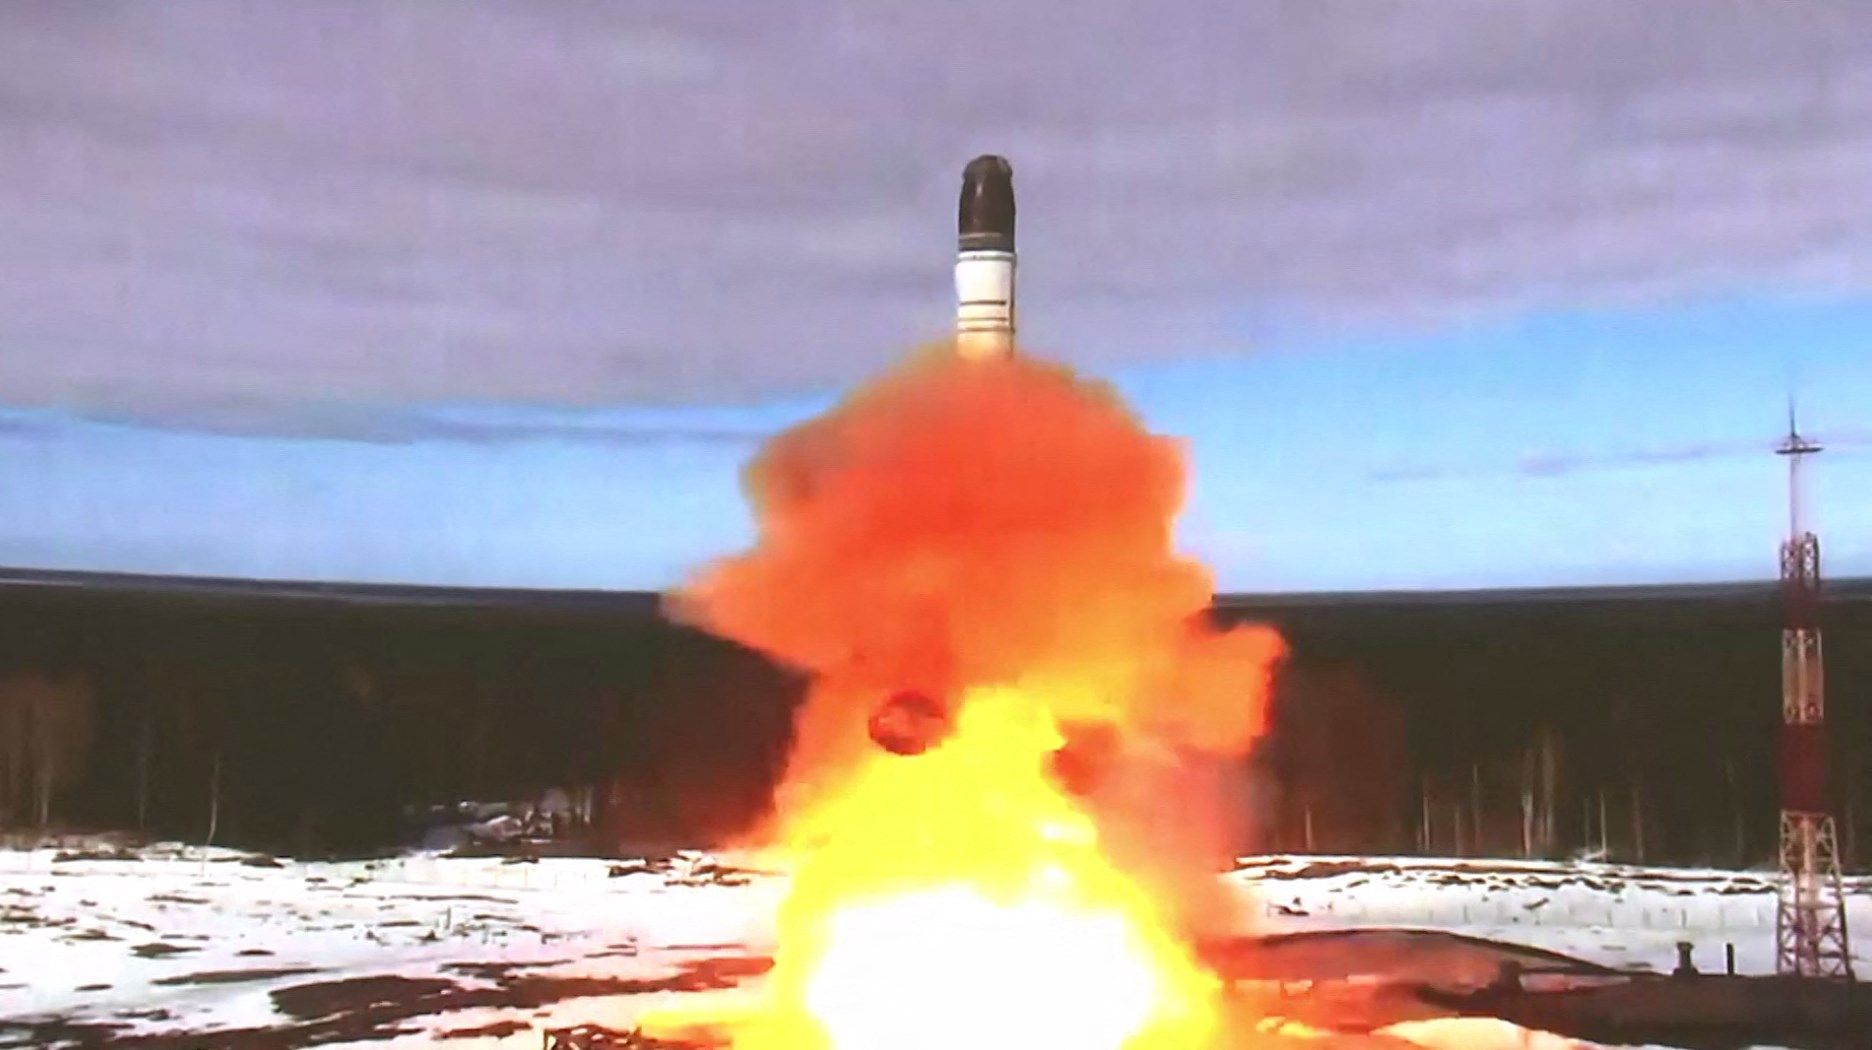 A Sarmat intercontinental ballistic missile is launched at Plesetsk testing field in Russia in April 2022. Photo: Russian Defence Ministry via AFP